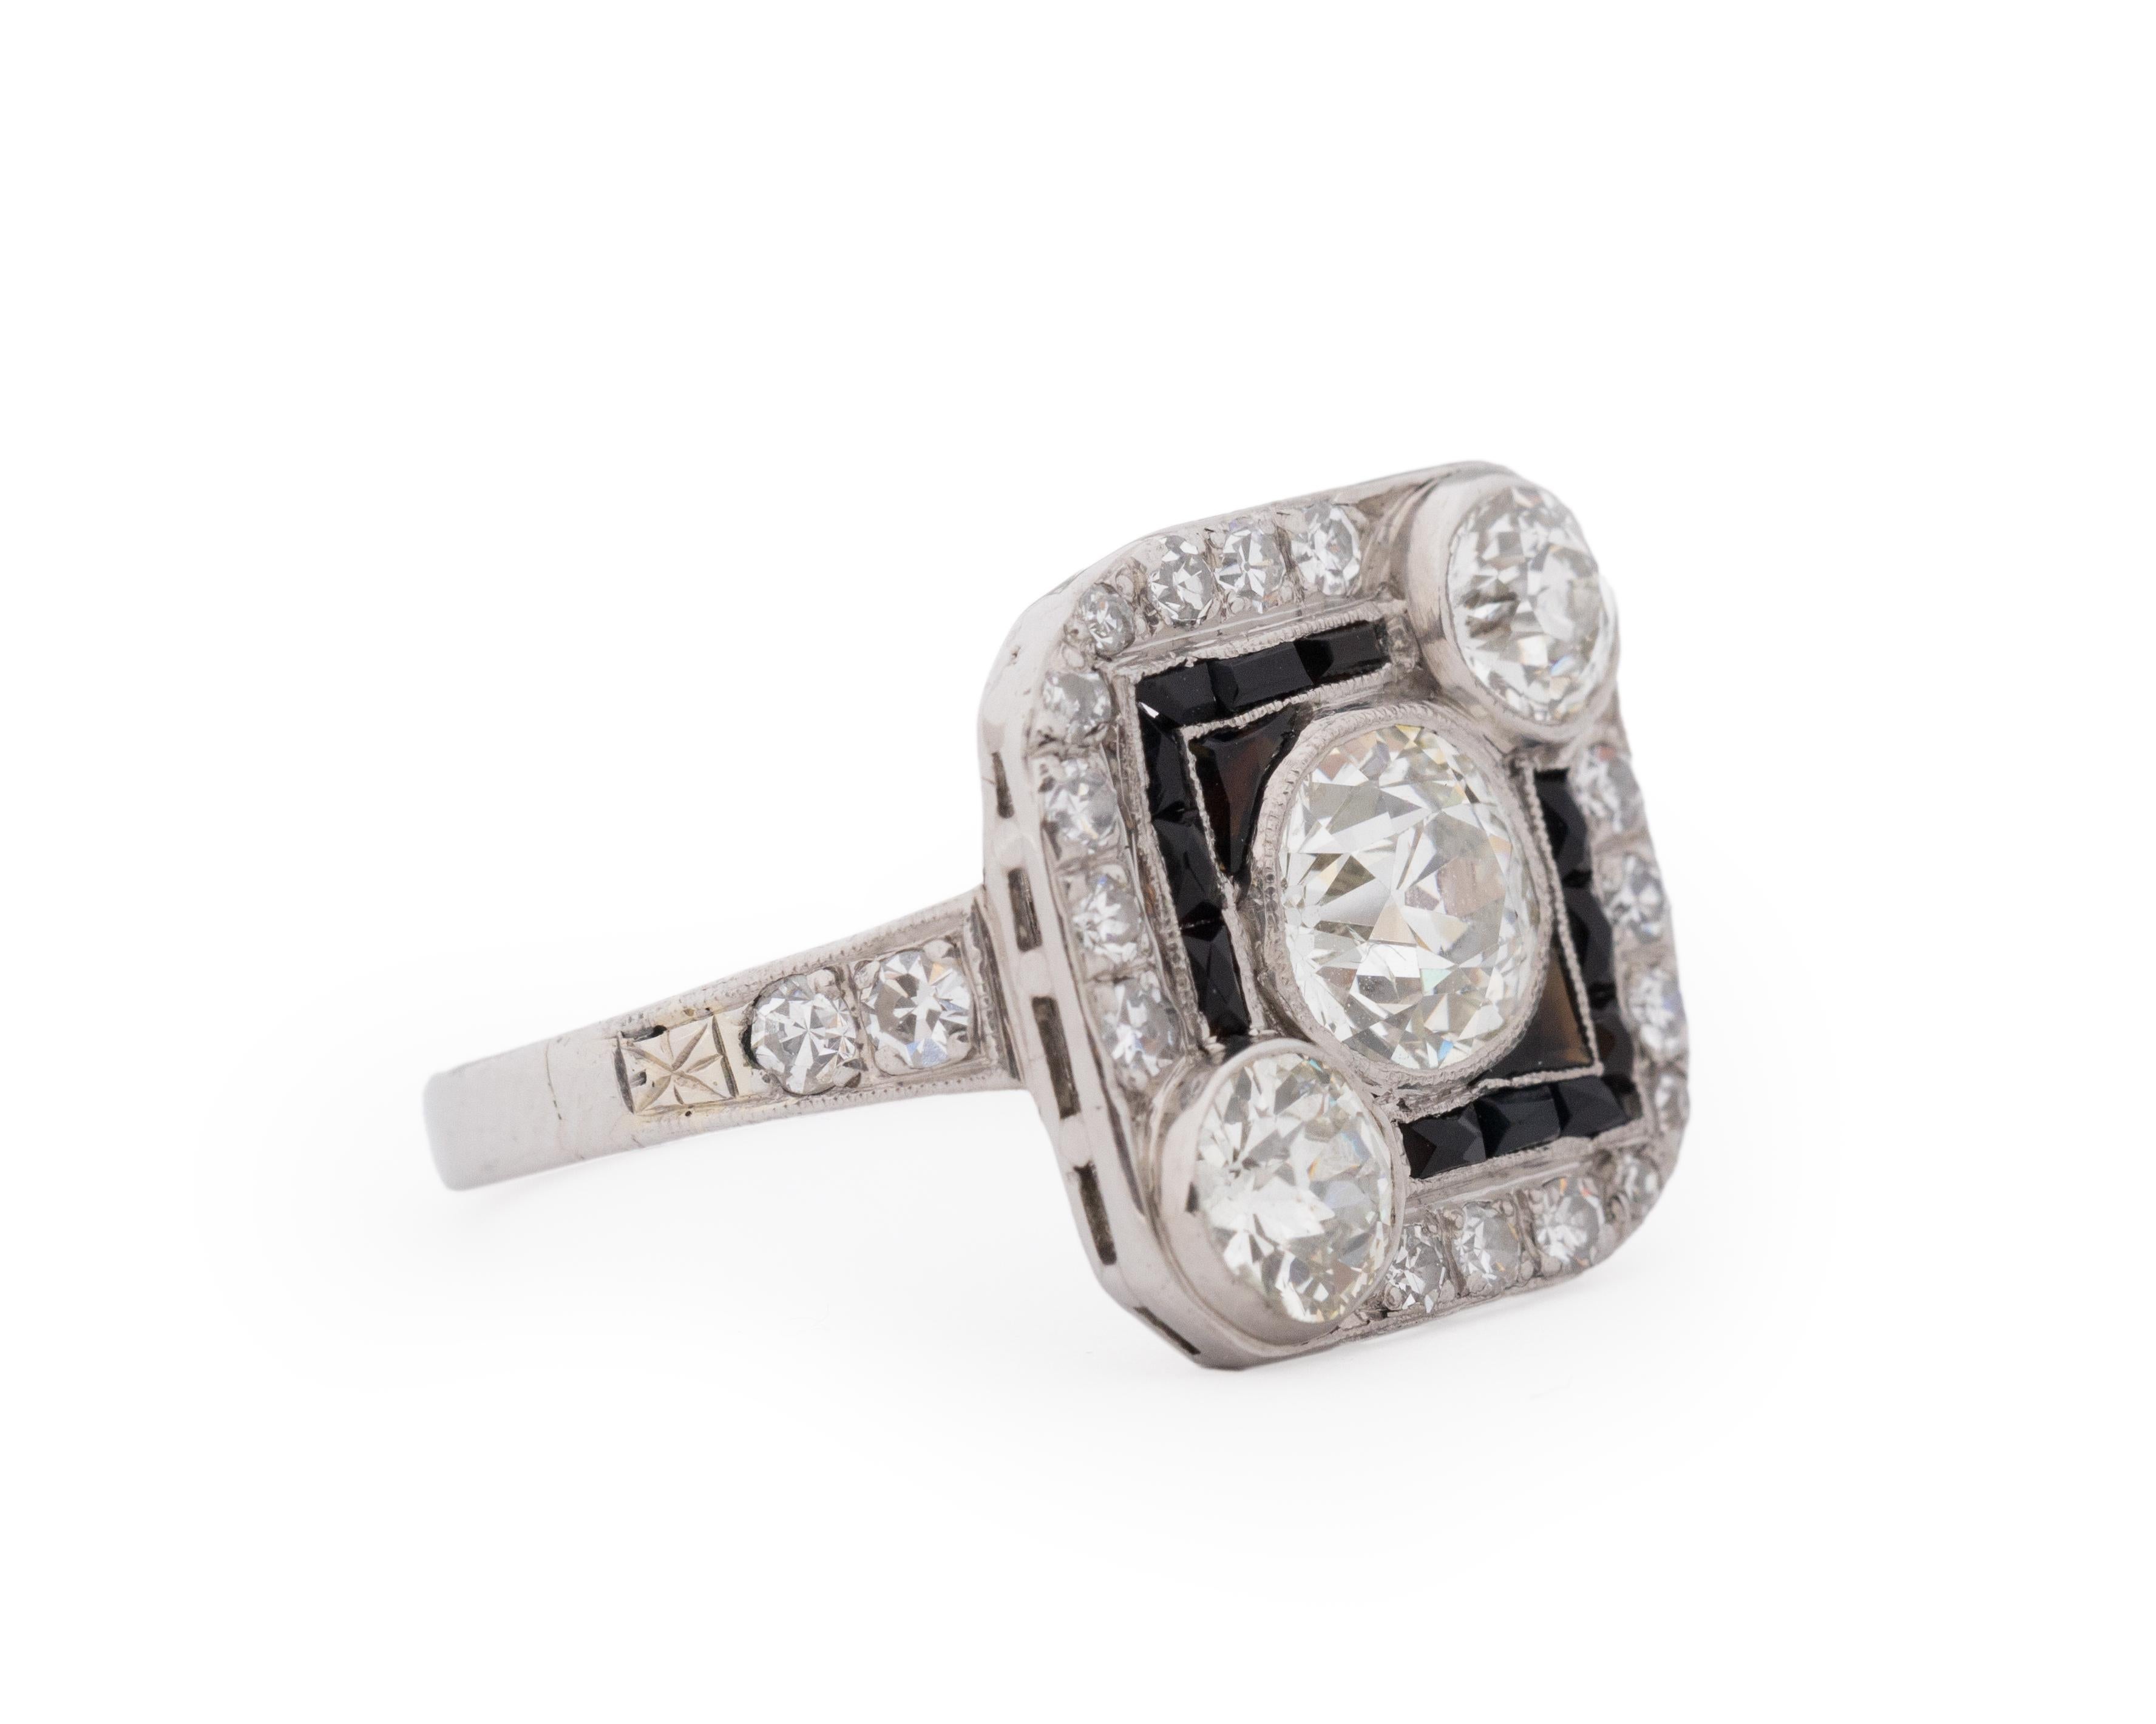 Year: 1930s

Item Details:
Ring Size: 7.5
Metal Type: Platinum [Hallmarked, and Tested]
Weight: 6.5 grams

Center Diamond Details:

GIA Report#: 6234063629
Weight: 1.26ct total weight
Cut: Old European brilliant
Color: K
Clarity: SI2
Type: